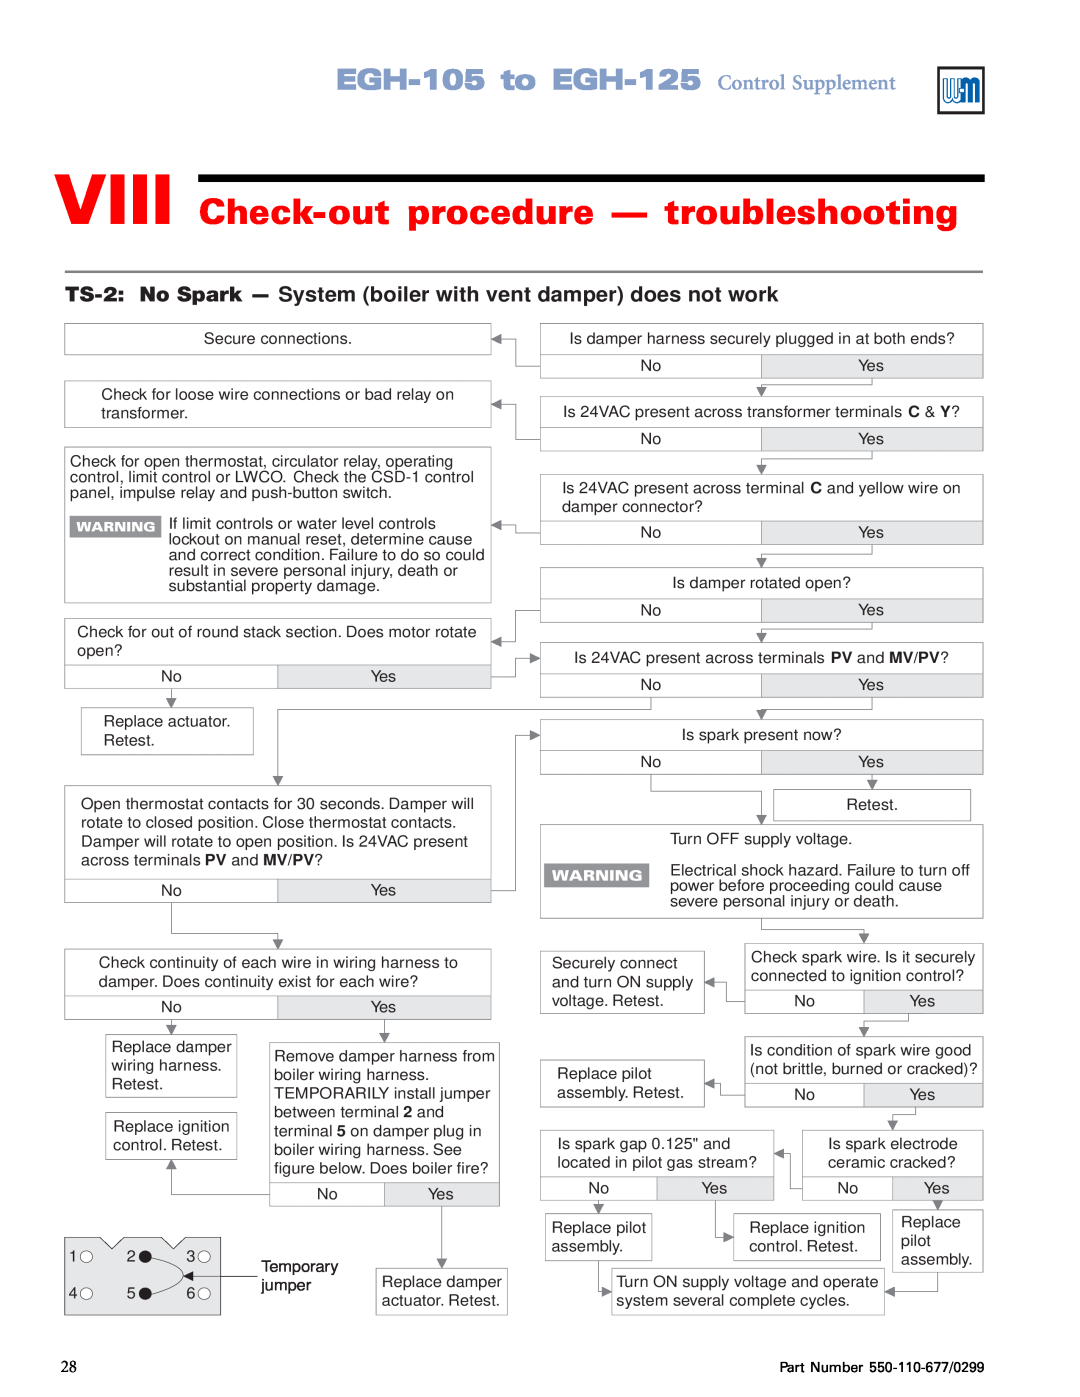 Weil-McLain manual VIII Check-outprocedure - troubleshooting, EGH-105to EGH-125 Control Supplement, Secure connections 